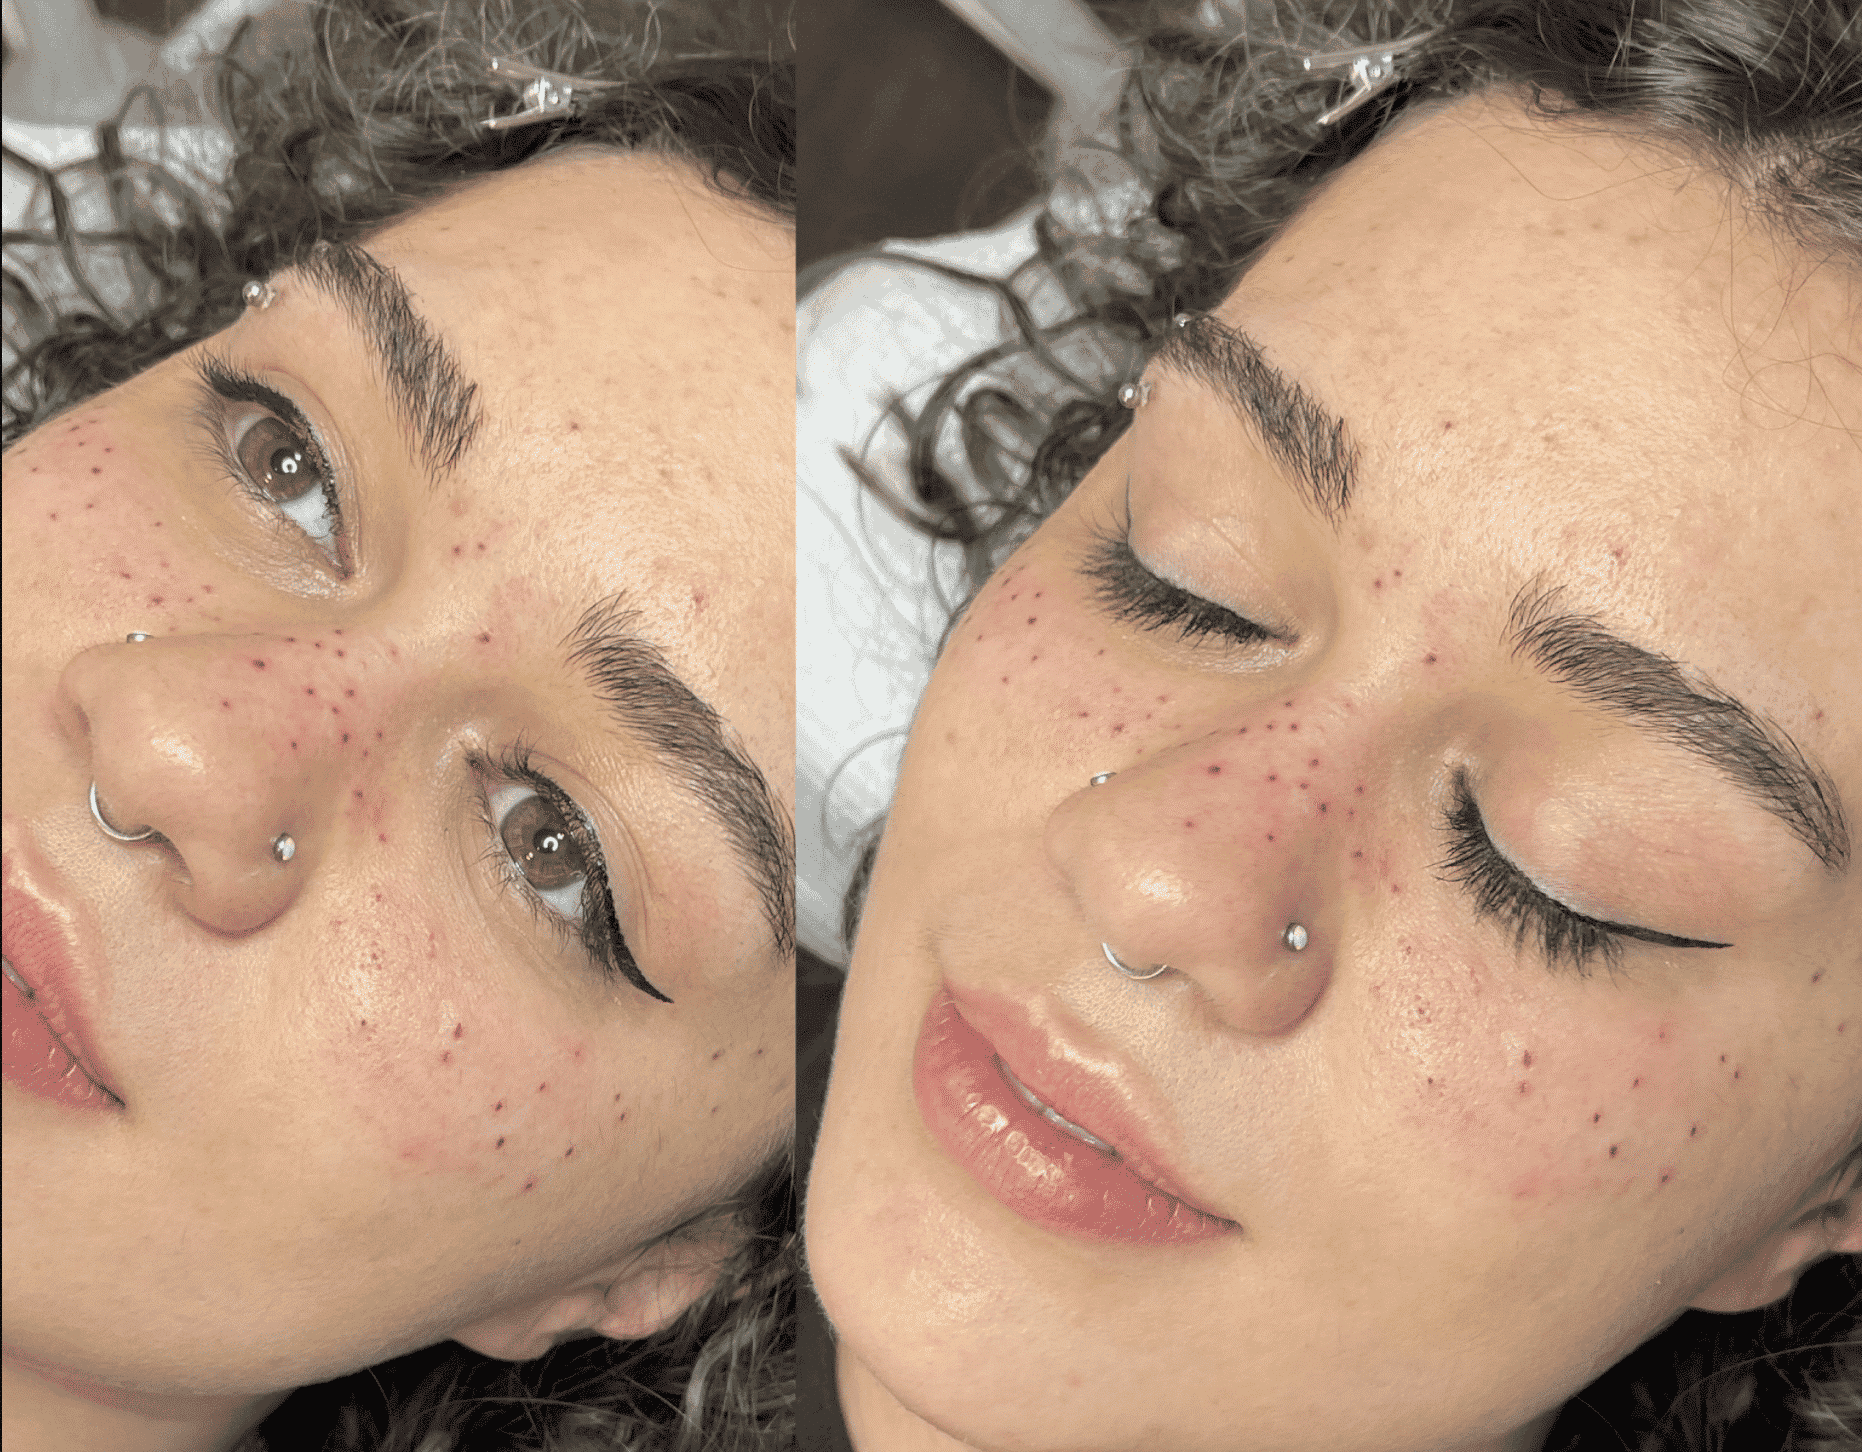 Woman Tattoos Freckles On Face